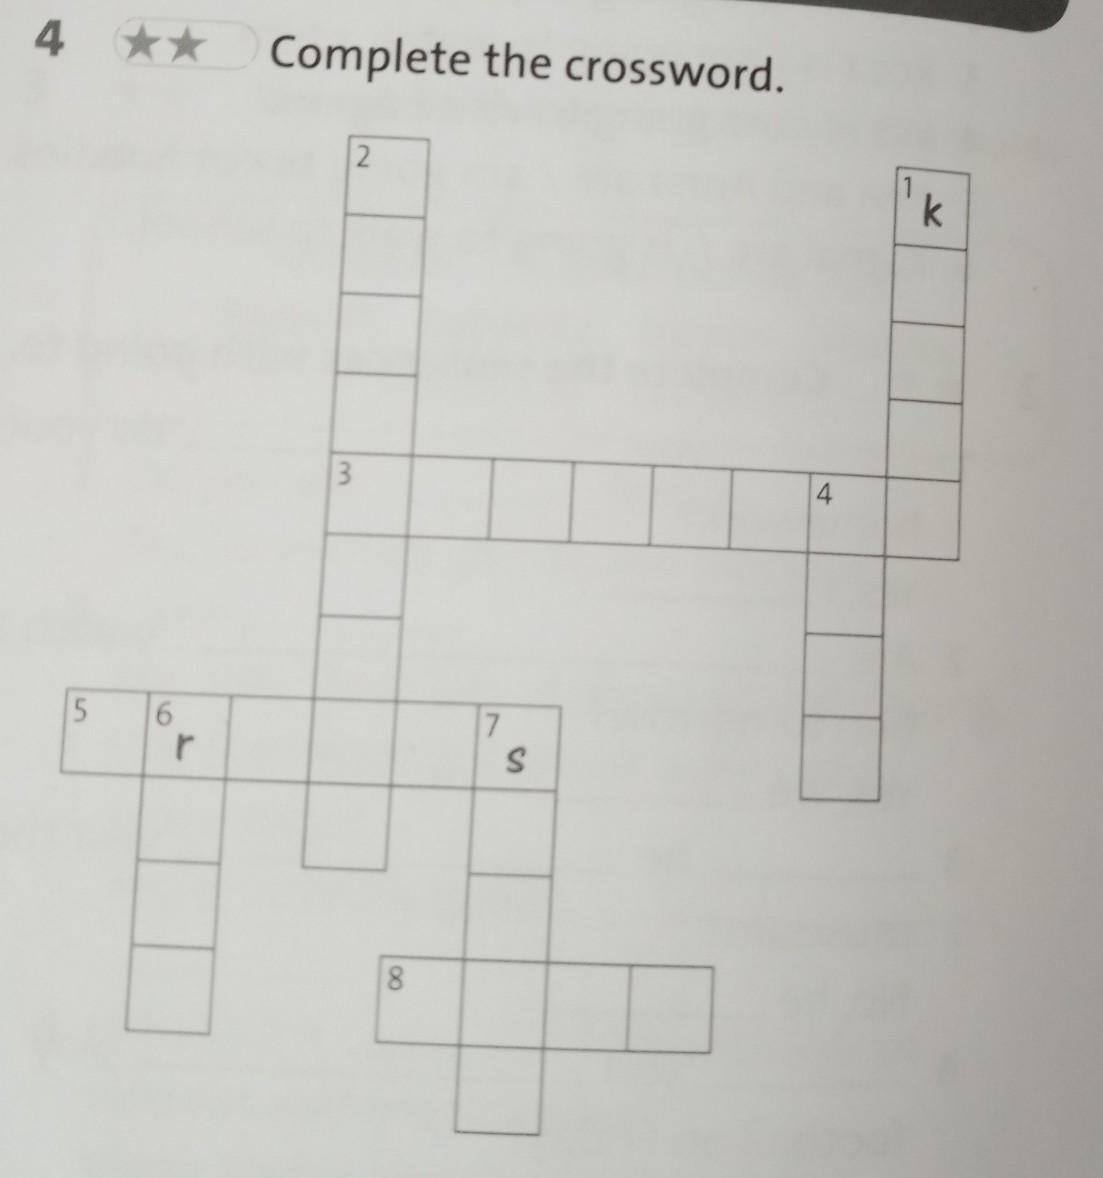 4 complete the crossword. 1 Complete the crossword. Complete the crossword. Down across. Complete the crossword 5 класс down. Complete the crossword one.